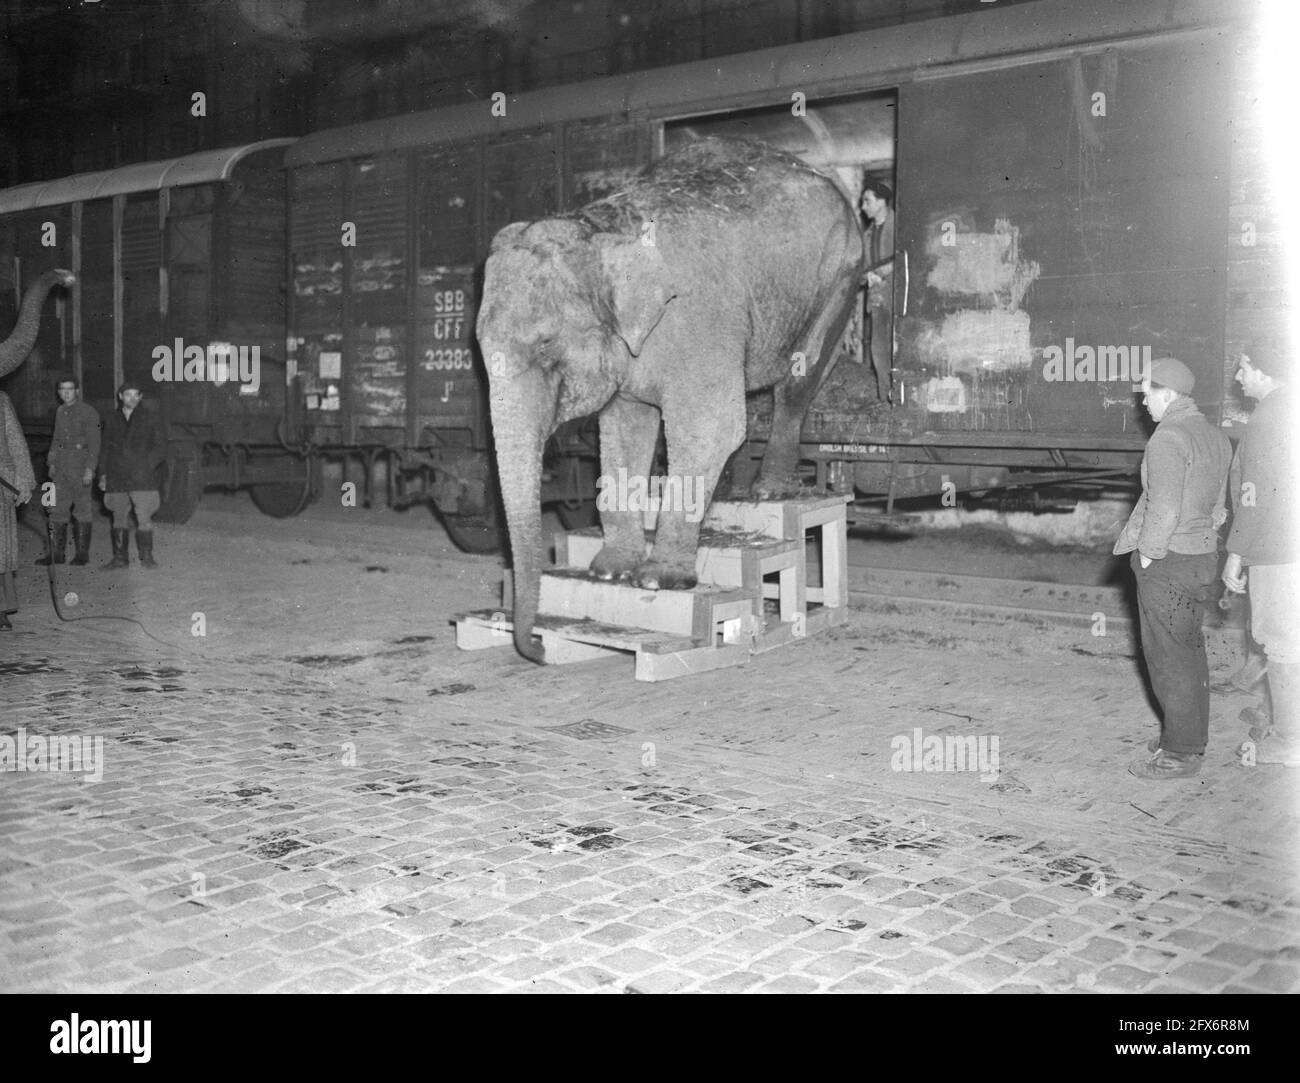 Circus Union, December 13, 1946, CIRCUS, UNION, The Netherlands, 20th century press agency photo, news to remember, documentary, historic photography 1945-1990, visual stories, human history of the Twentieth Century, capturing moments in time Stock Photo